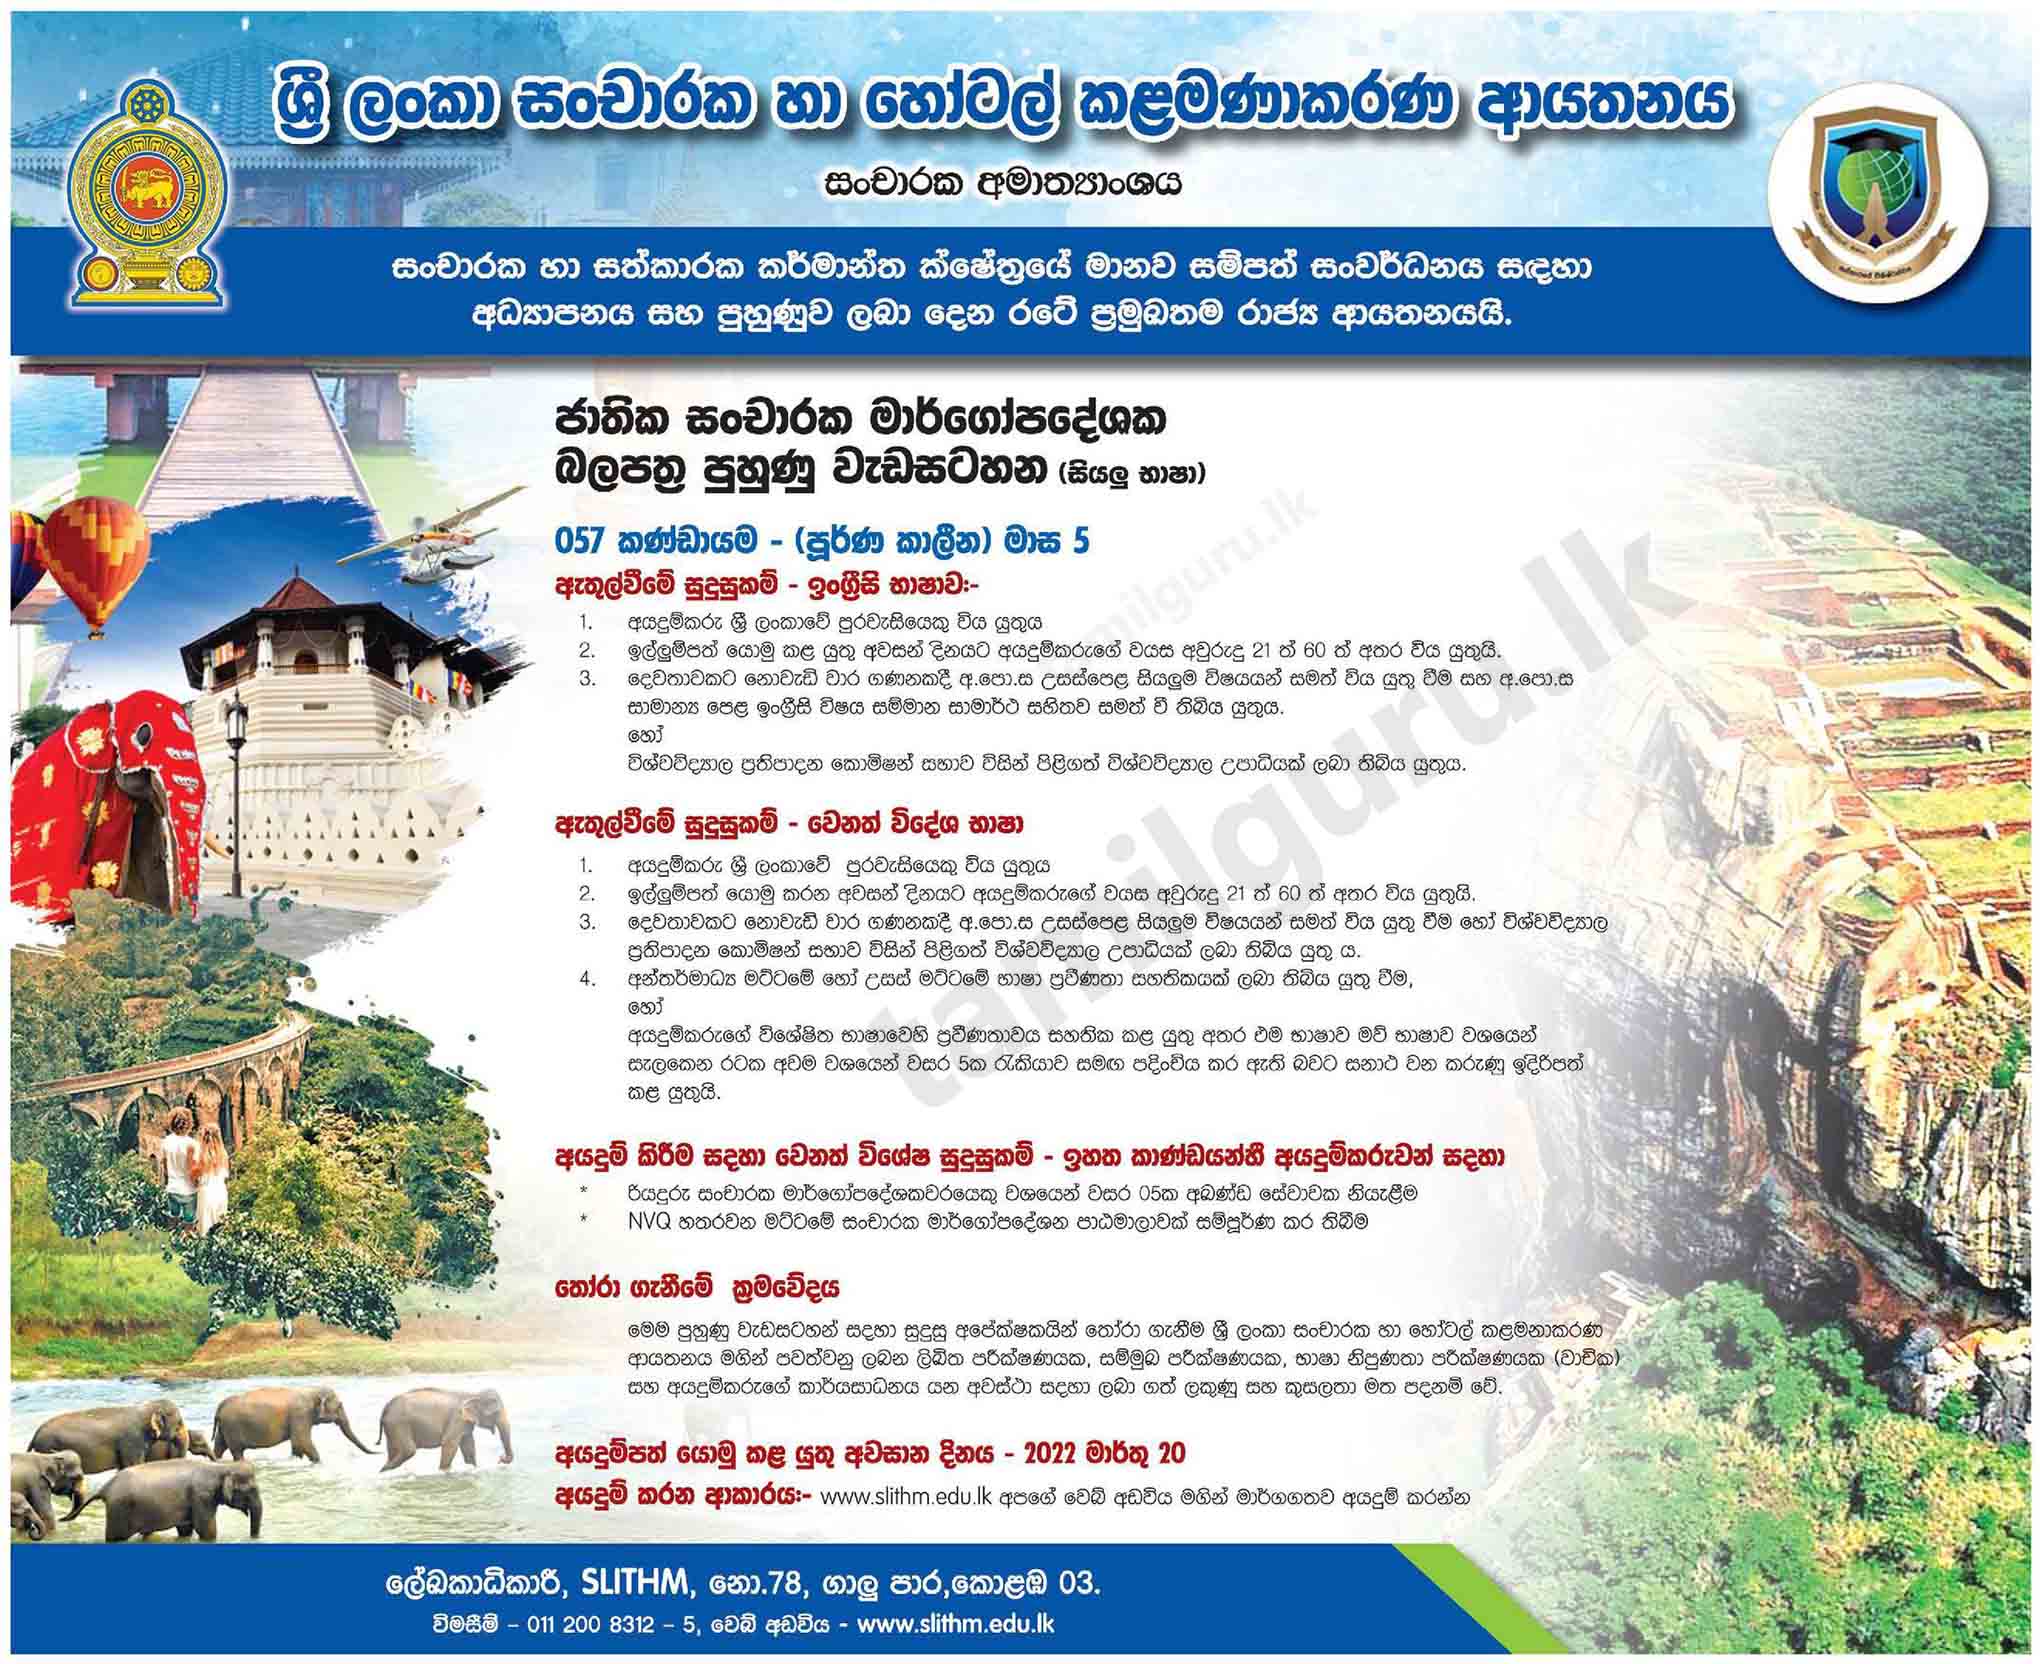 National Tourist Guides' Licencing Training Programme (All Languages) 2022 - Sri Lanka Institute of Tourism & Hotel Management (SLITHM) (Notice in Sinhala)